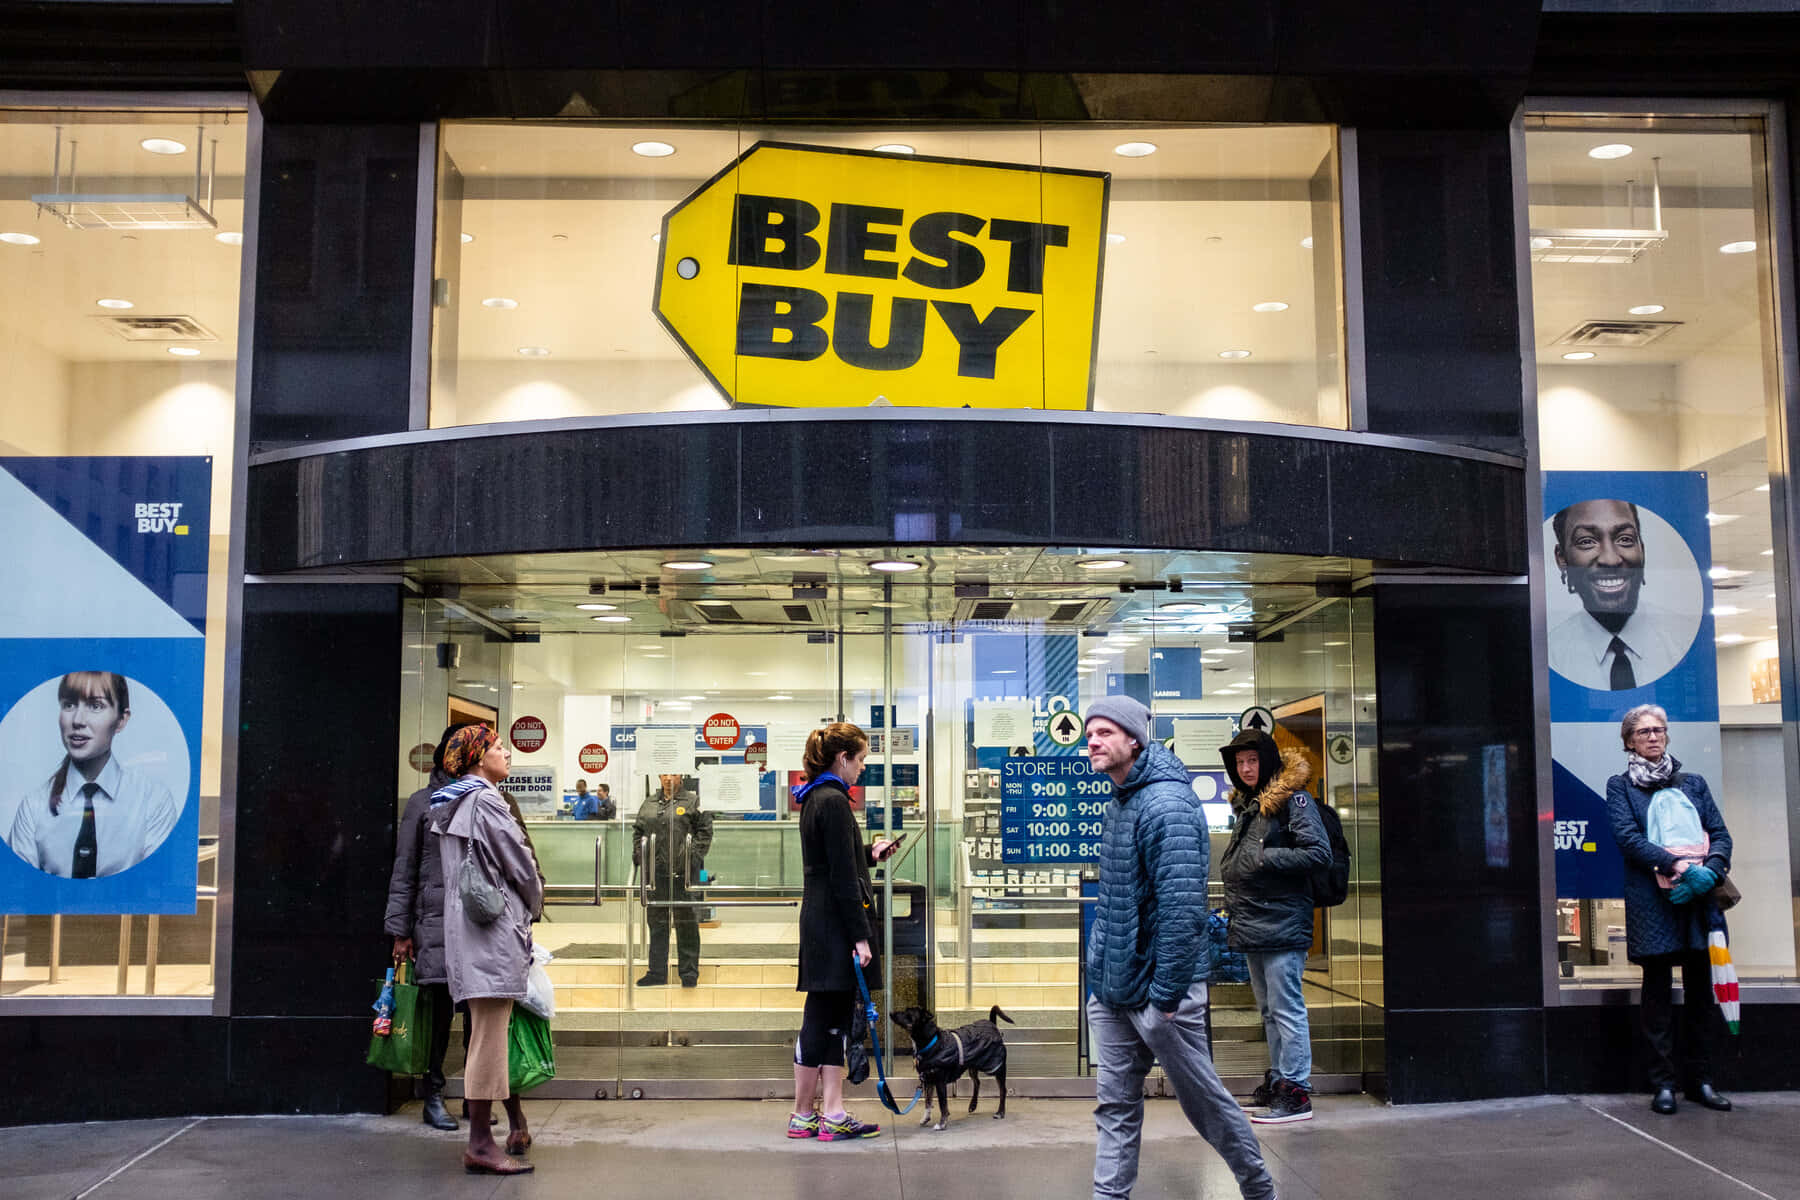 Get the Electronics You Need at Best Buy